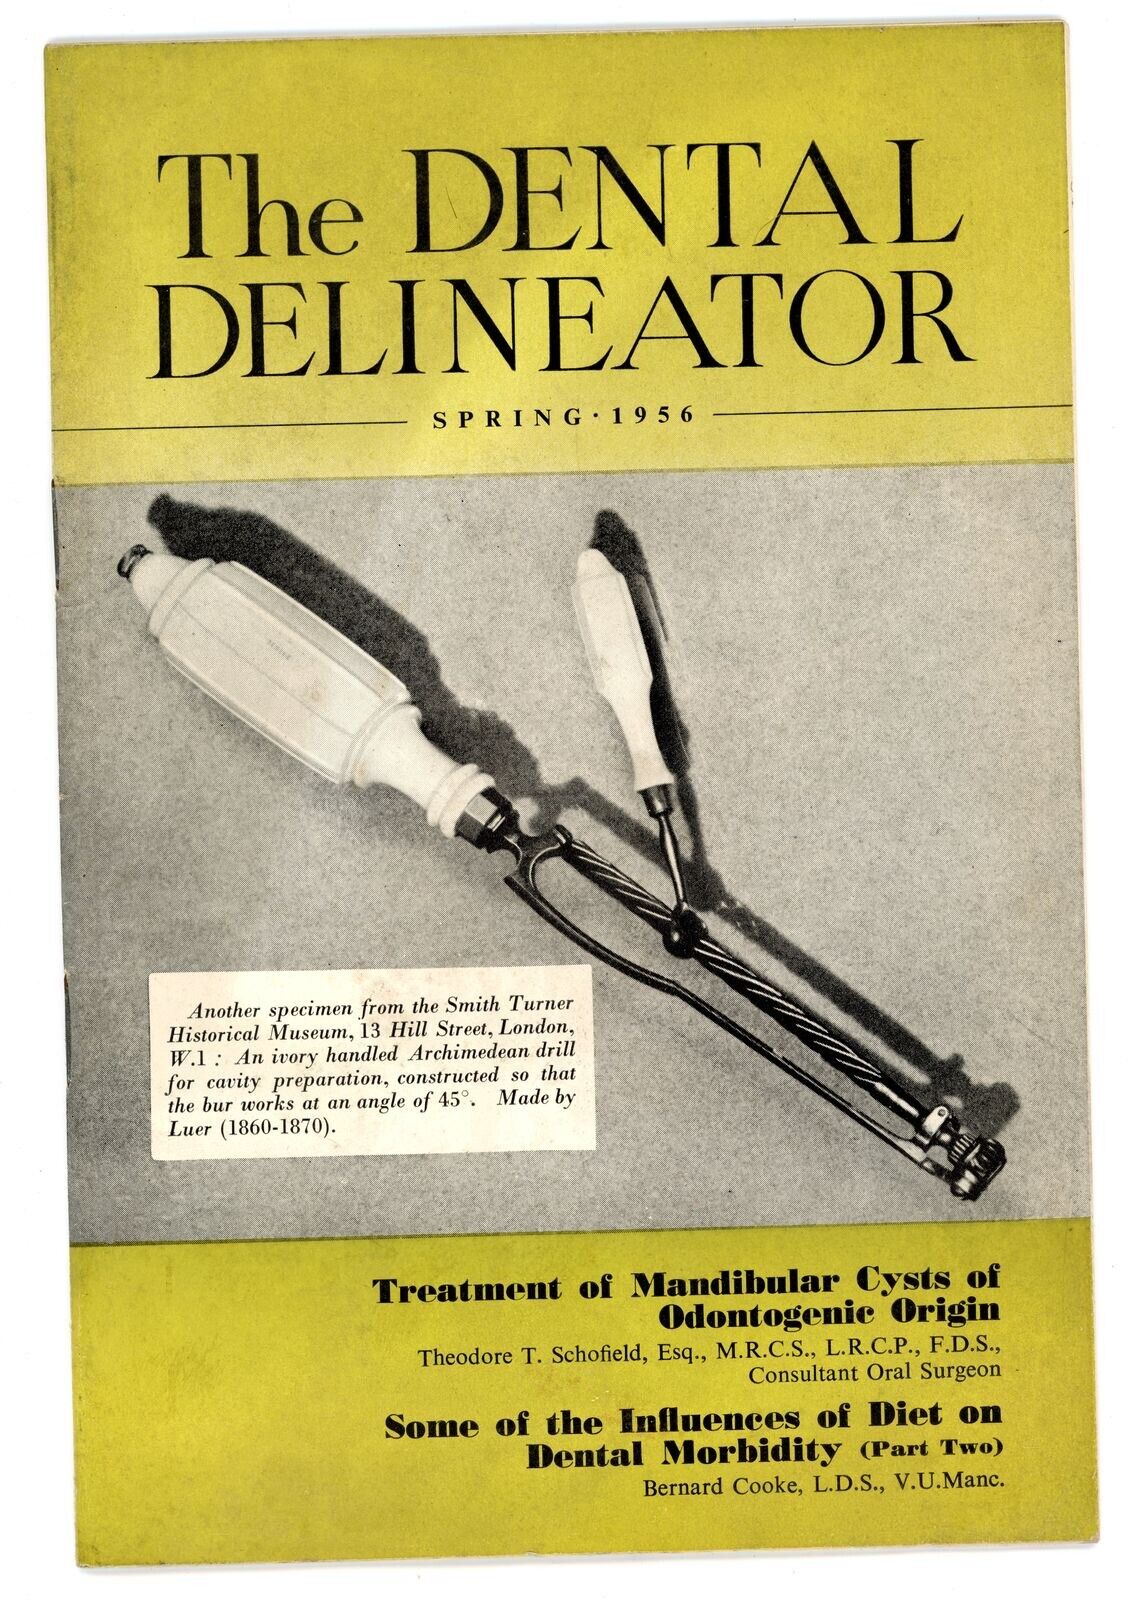 Vintage Dentistry magazine The Dental Delineator Spring 1956 great print ads #2